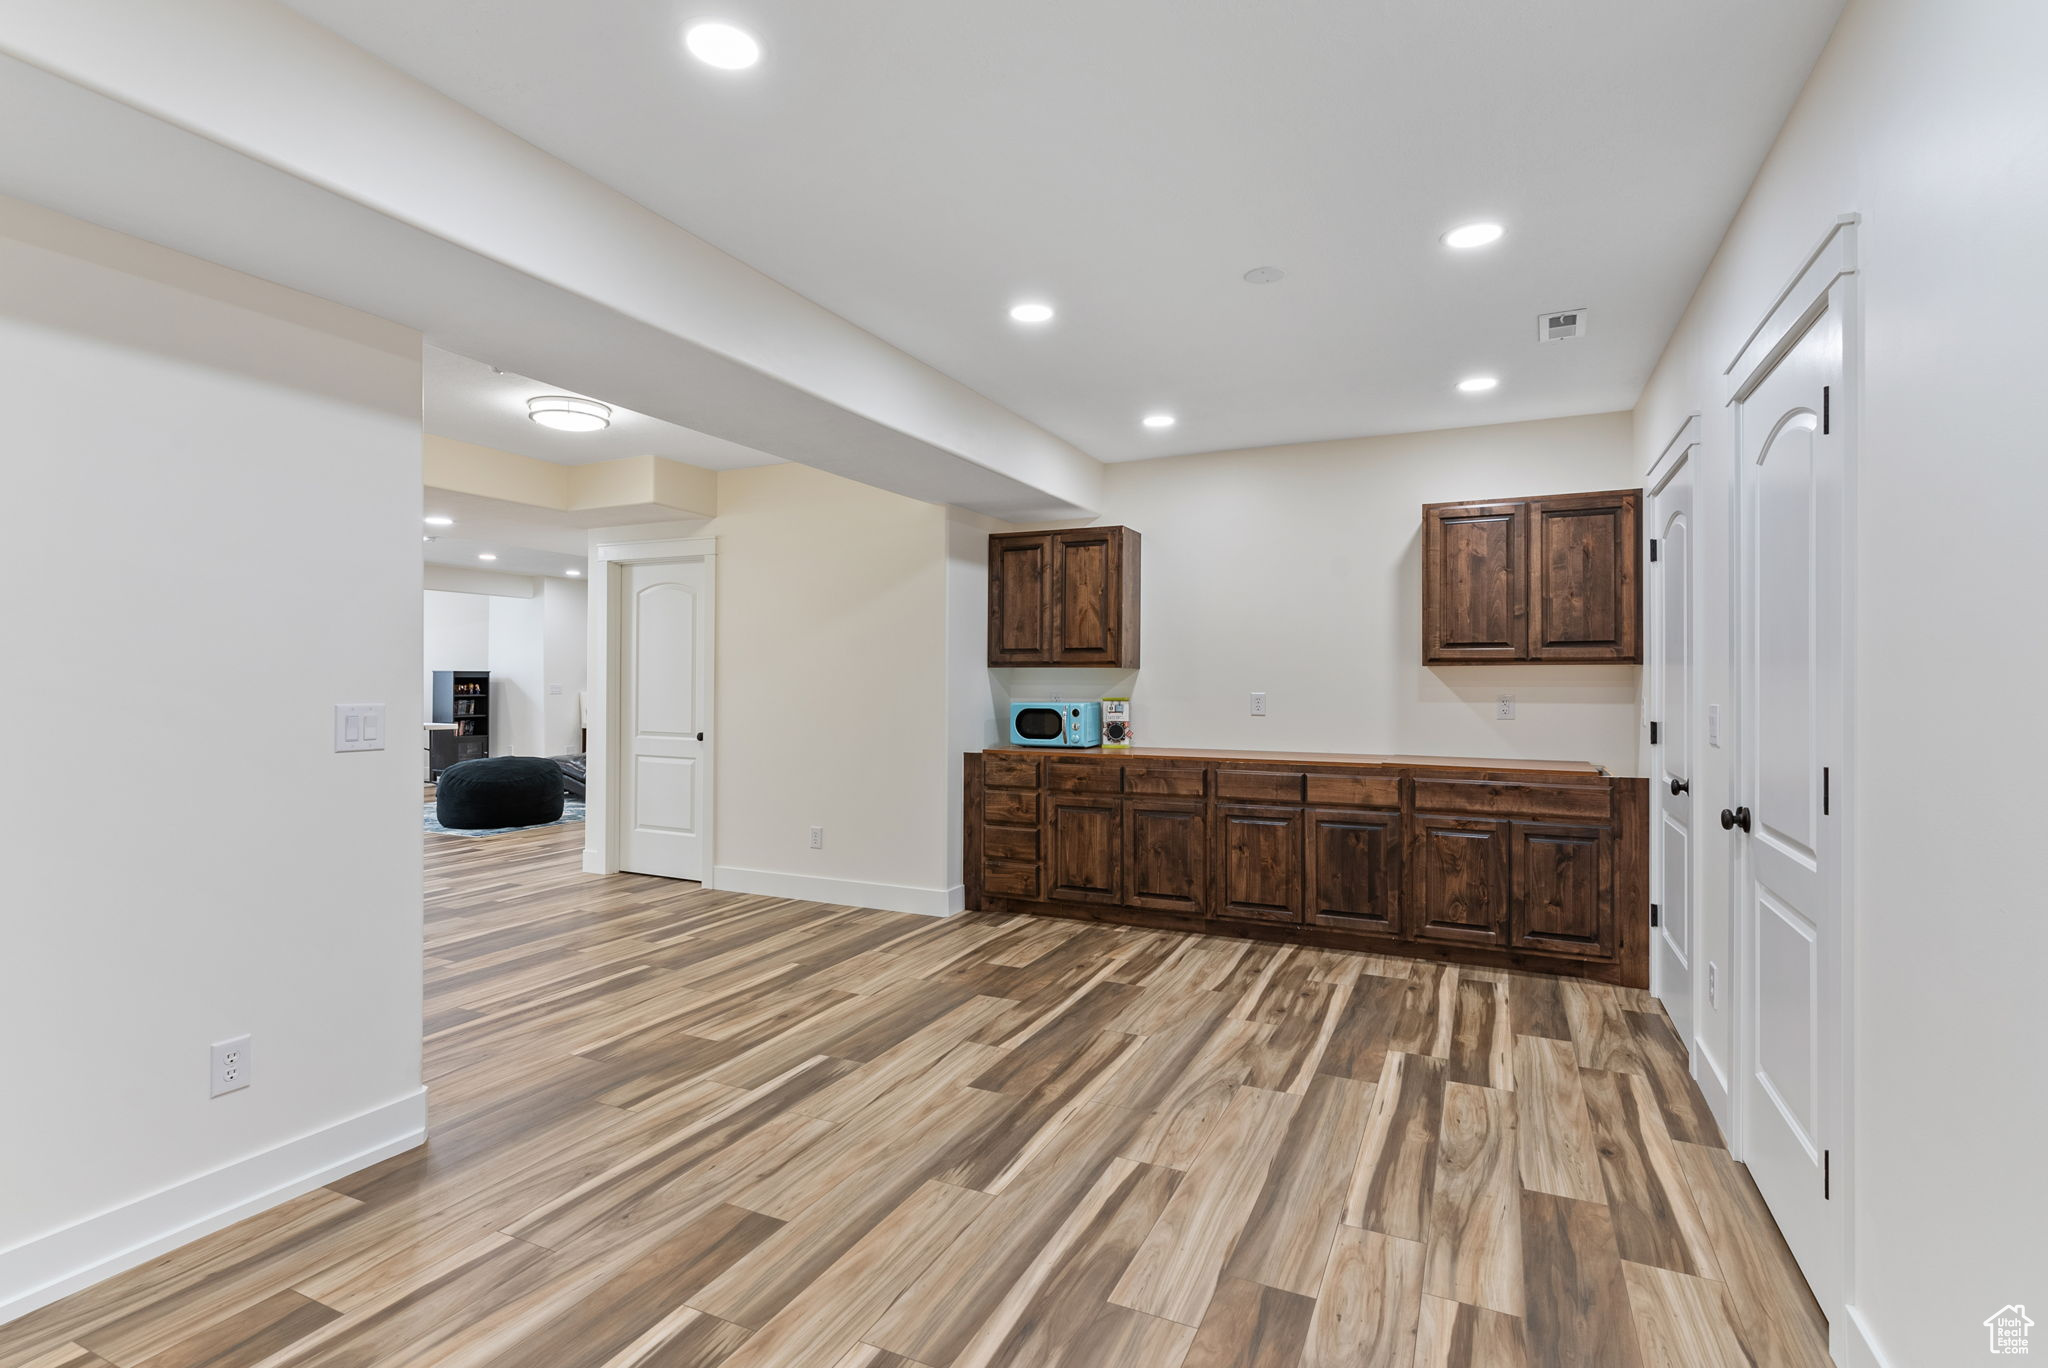 Kitchen featuring dark brown cabinets and wood-type flooring